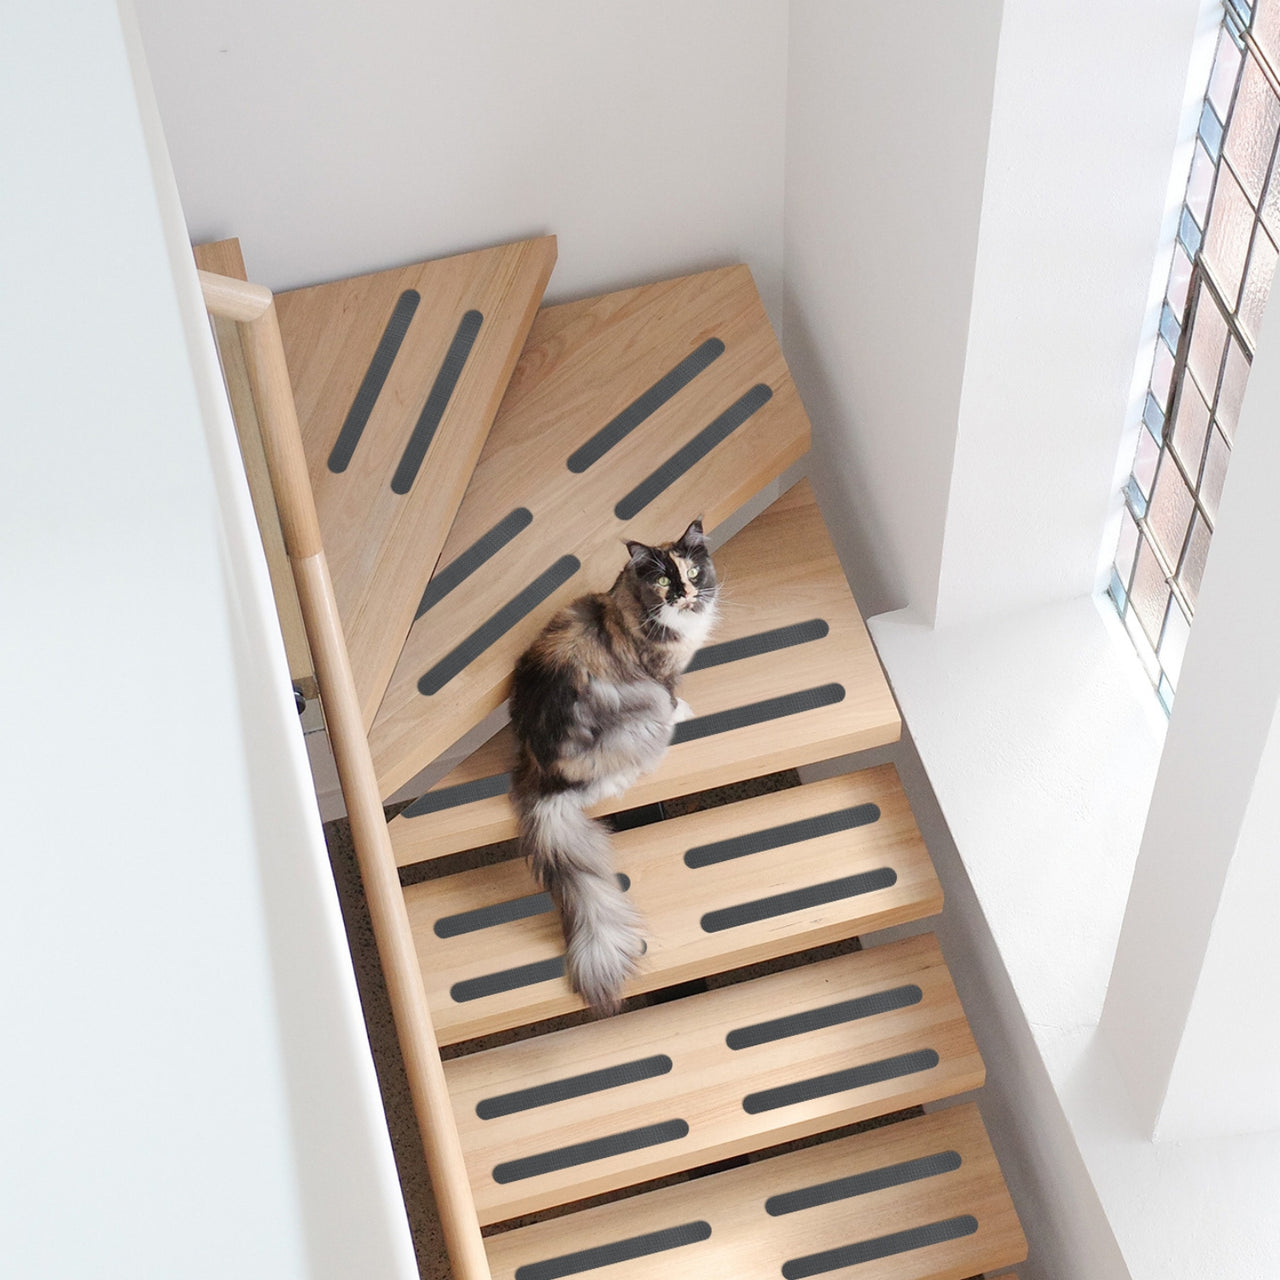 Grey self-adhesive anti slip strips applied in stairs